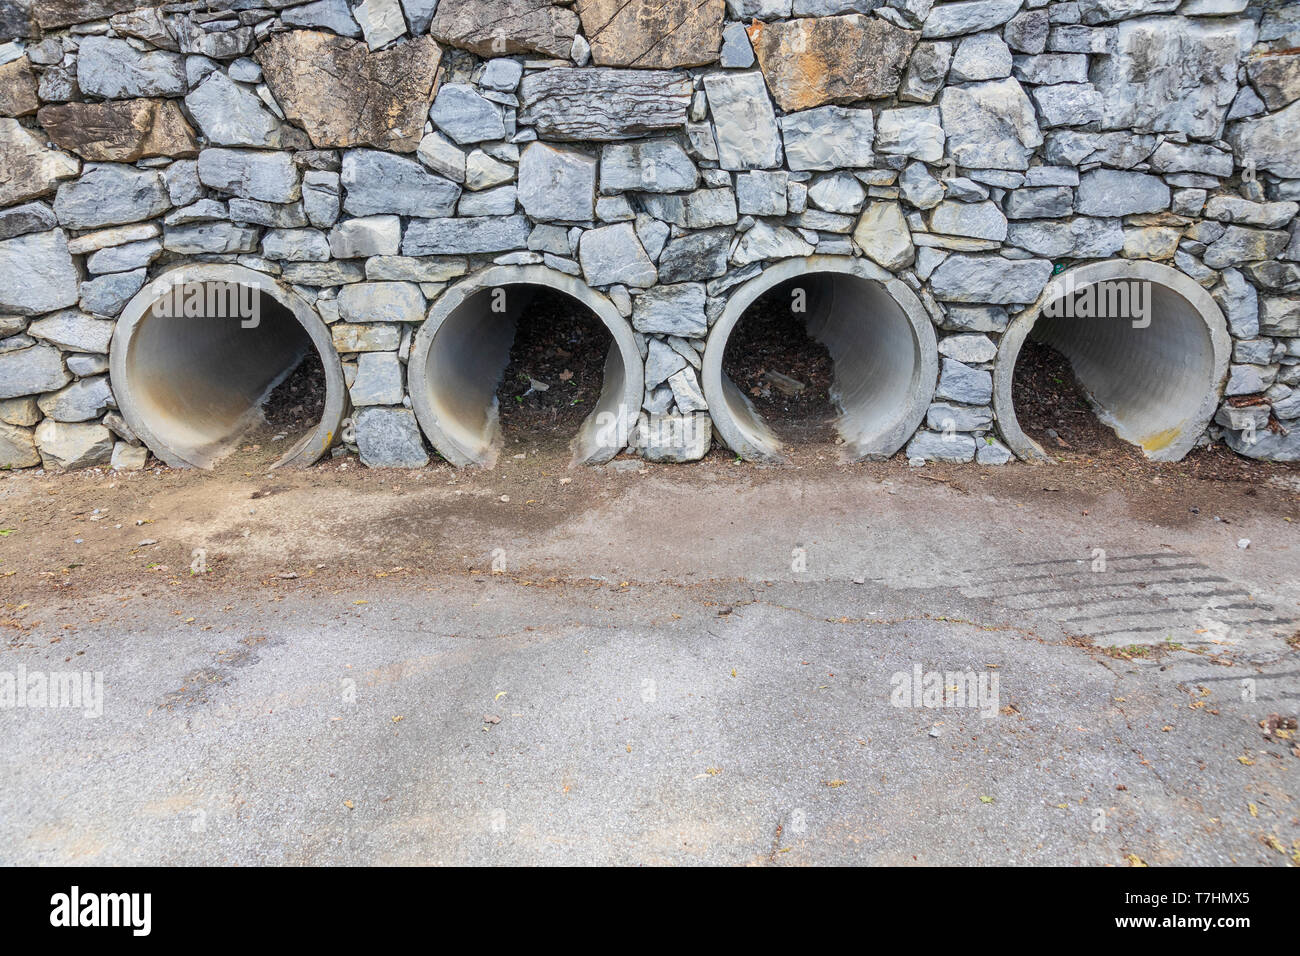 Four large pipes functioning as culverts through a rock wall, opening onto concrete parking lot. Stock Photo